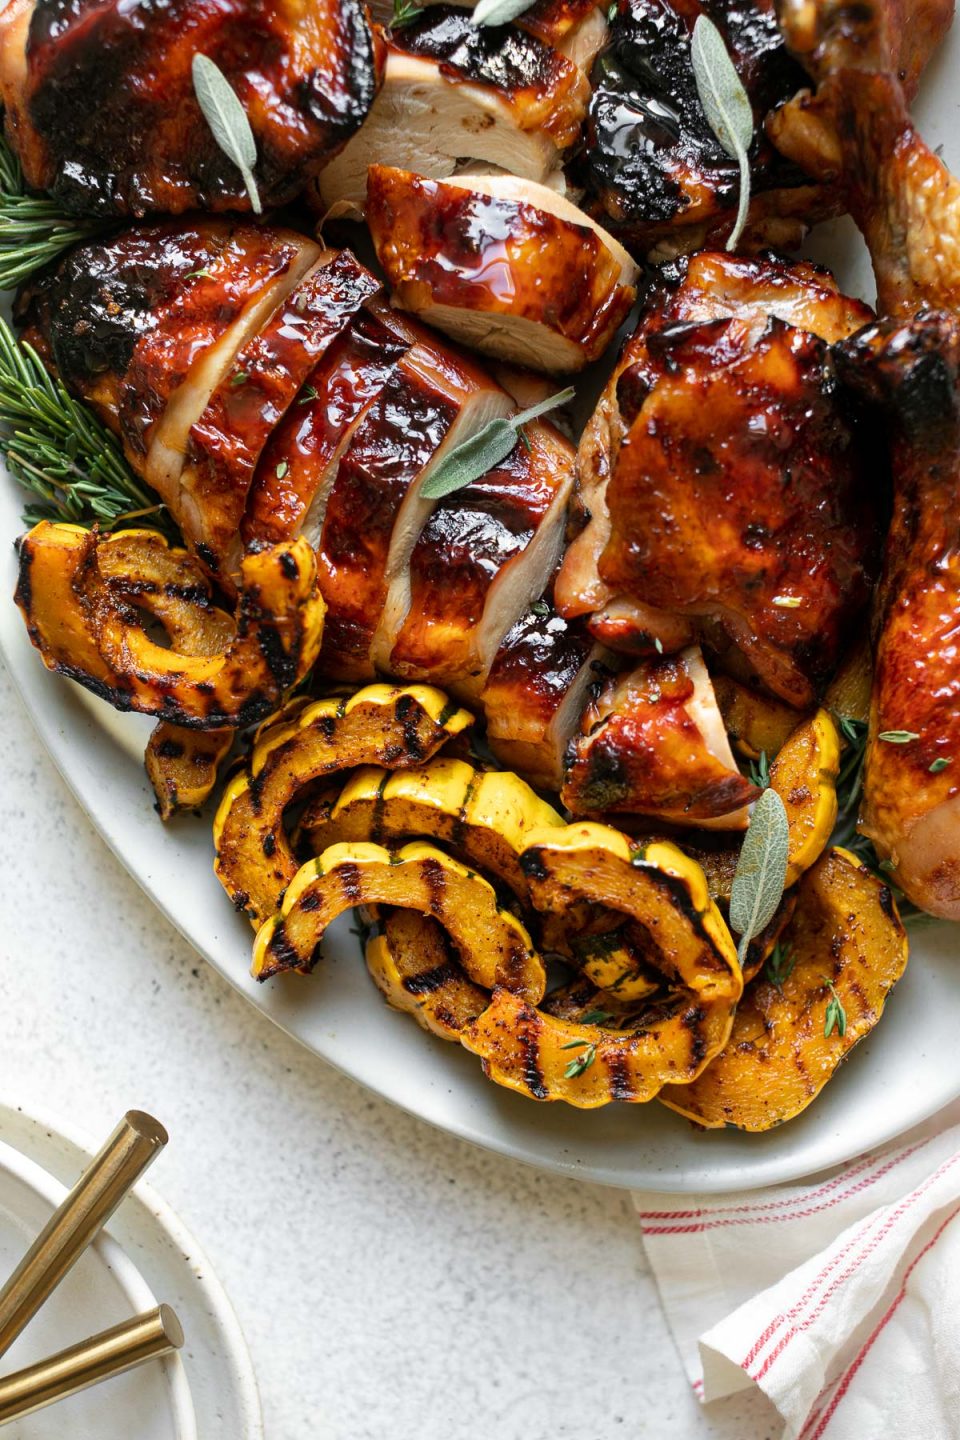 Grilled apple cider chicken on a large serving platter with grilled delicata squash & fresh herbs. The platter sits atop a white surface. Next to the platter is a stack of ceramic plates as well as a red & white striped linen napkin.